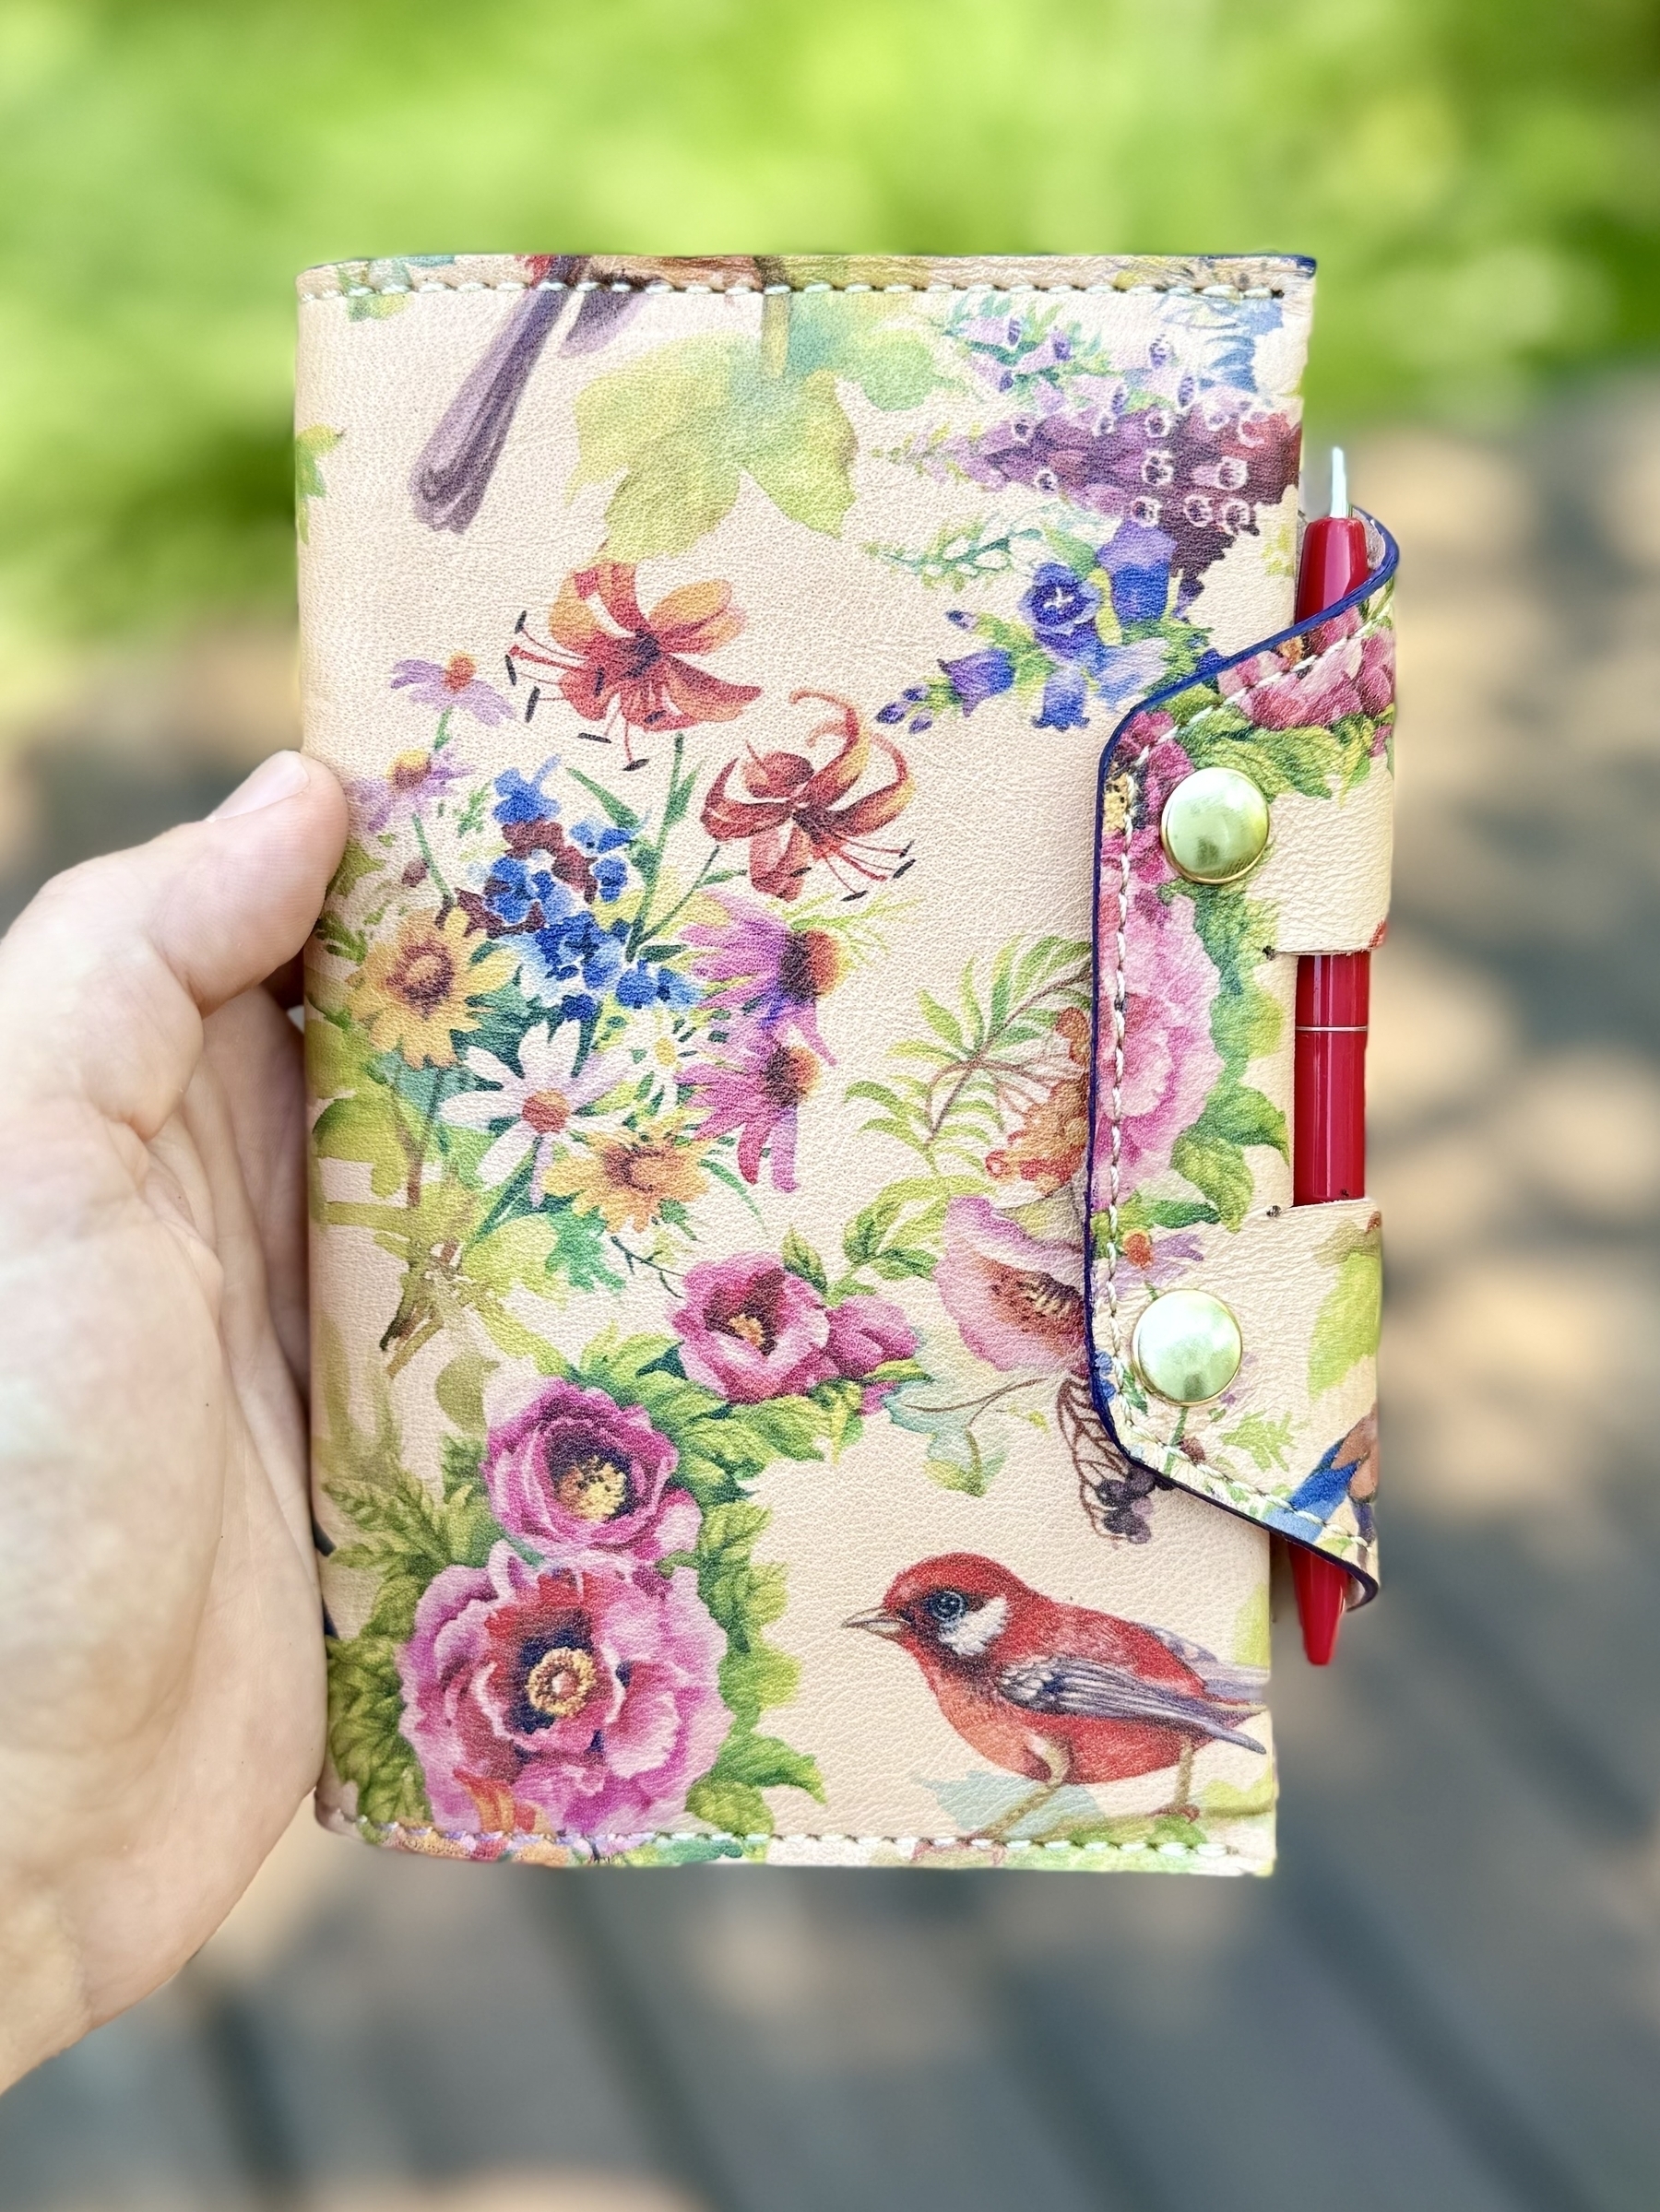 A hand is holding a floral-patterned notebook with a red pen attached to it.